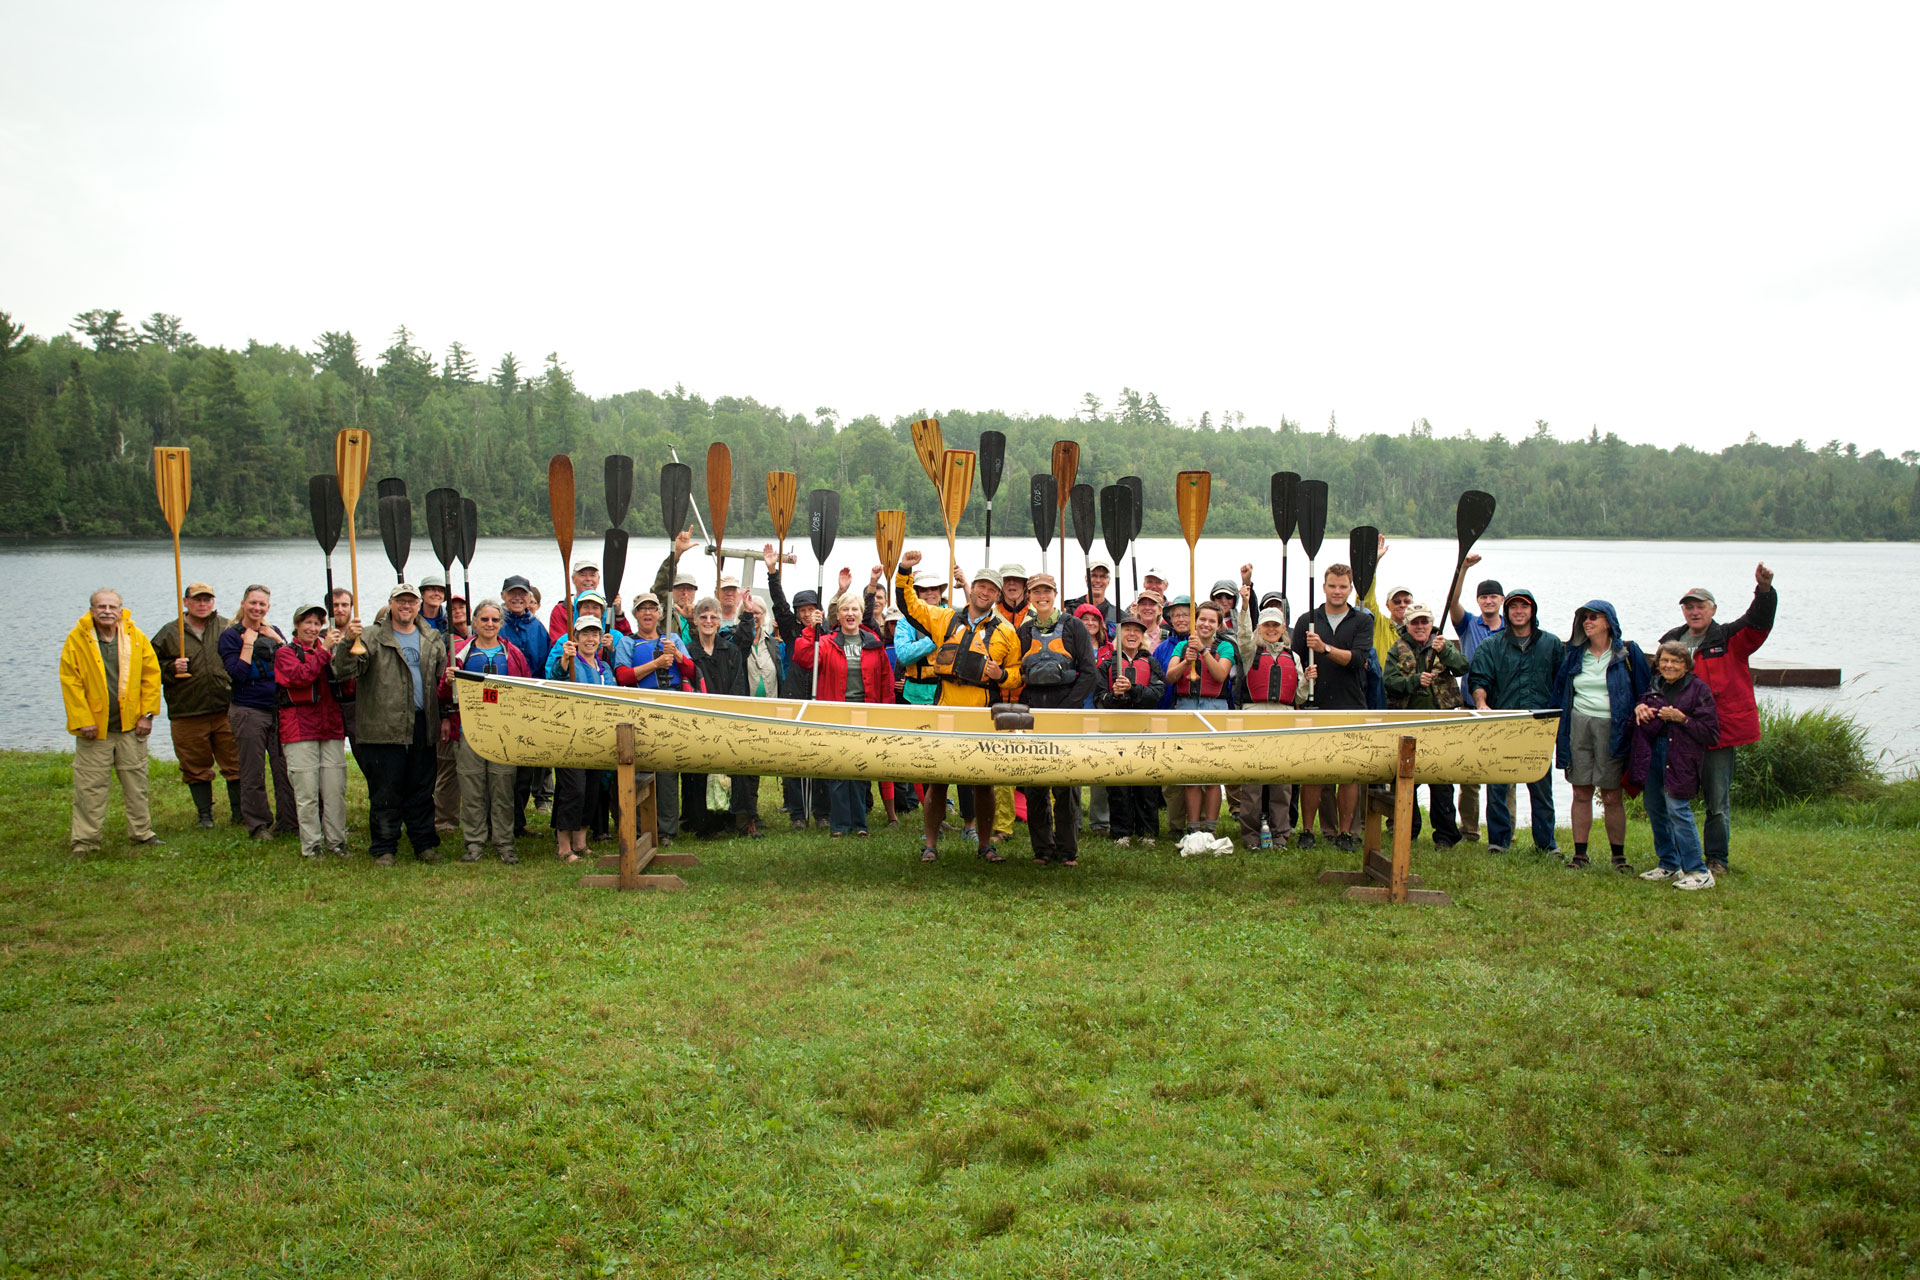 A large group of people, dressed in outdoor gear, stand in front of a lake holding paddles raised in the air, with a canoe placed on stands in front of them. The background features a forested shoreline under an overcast sky.